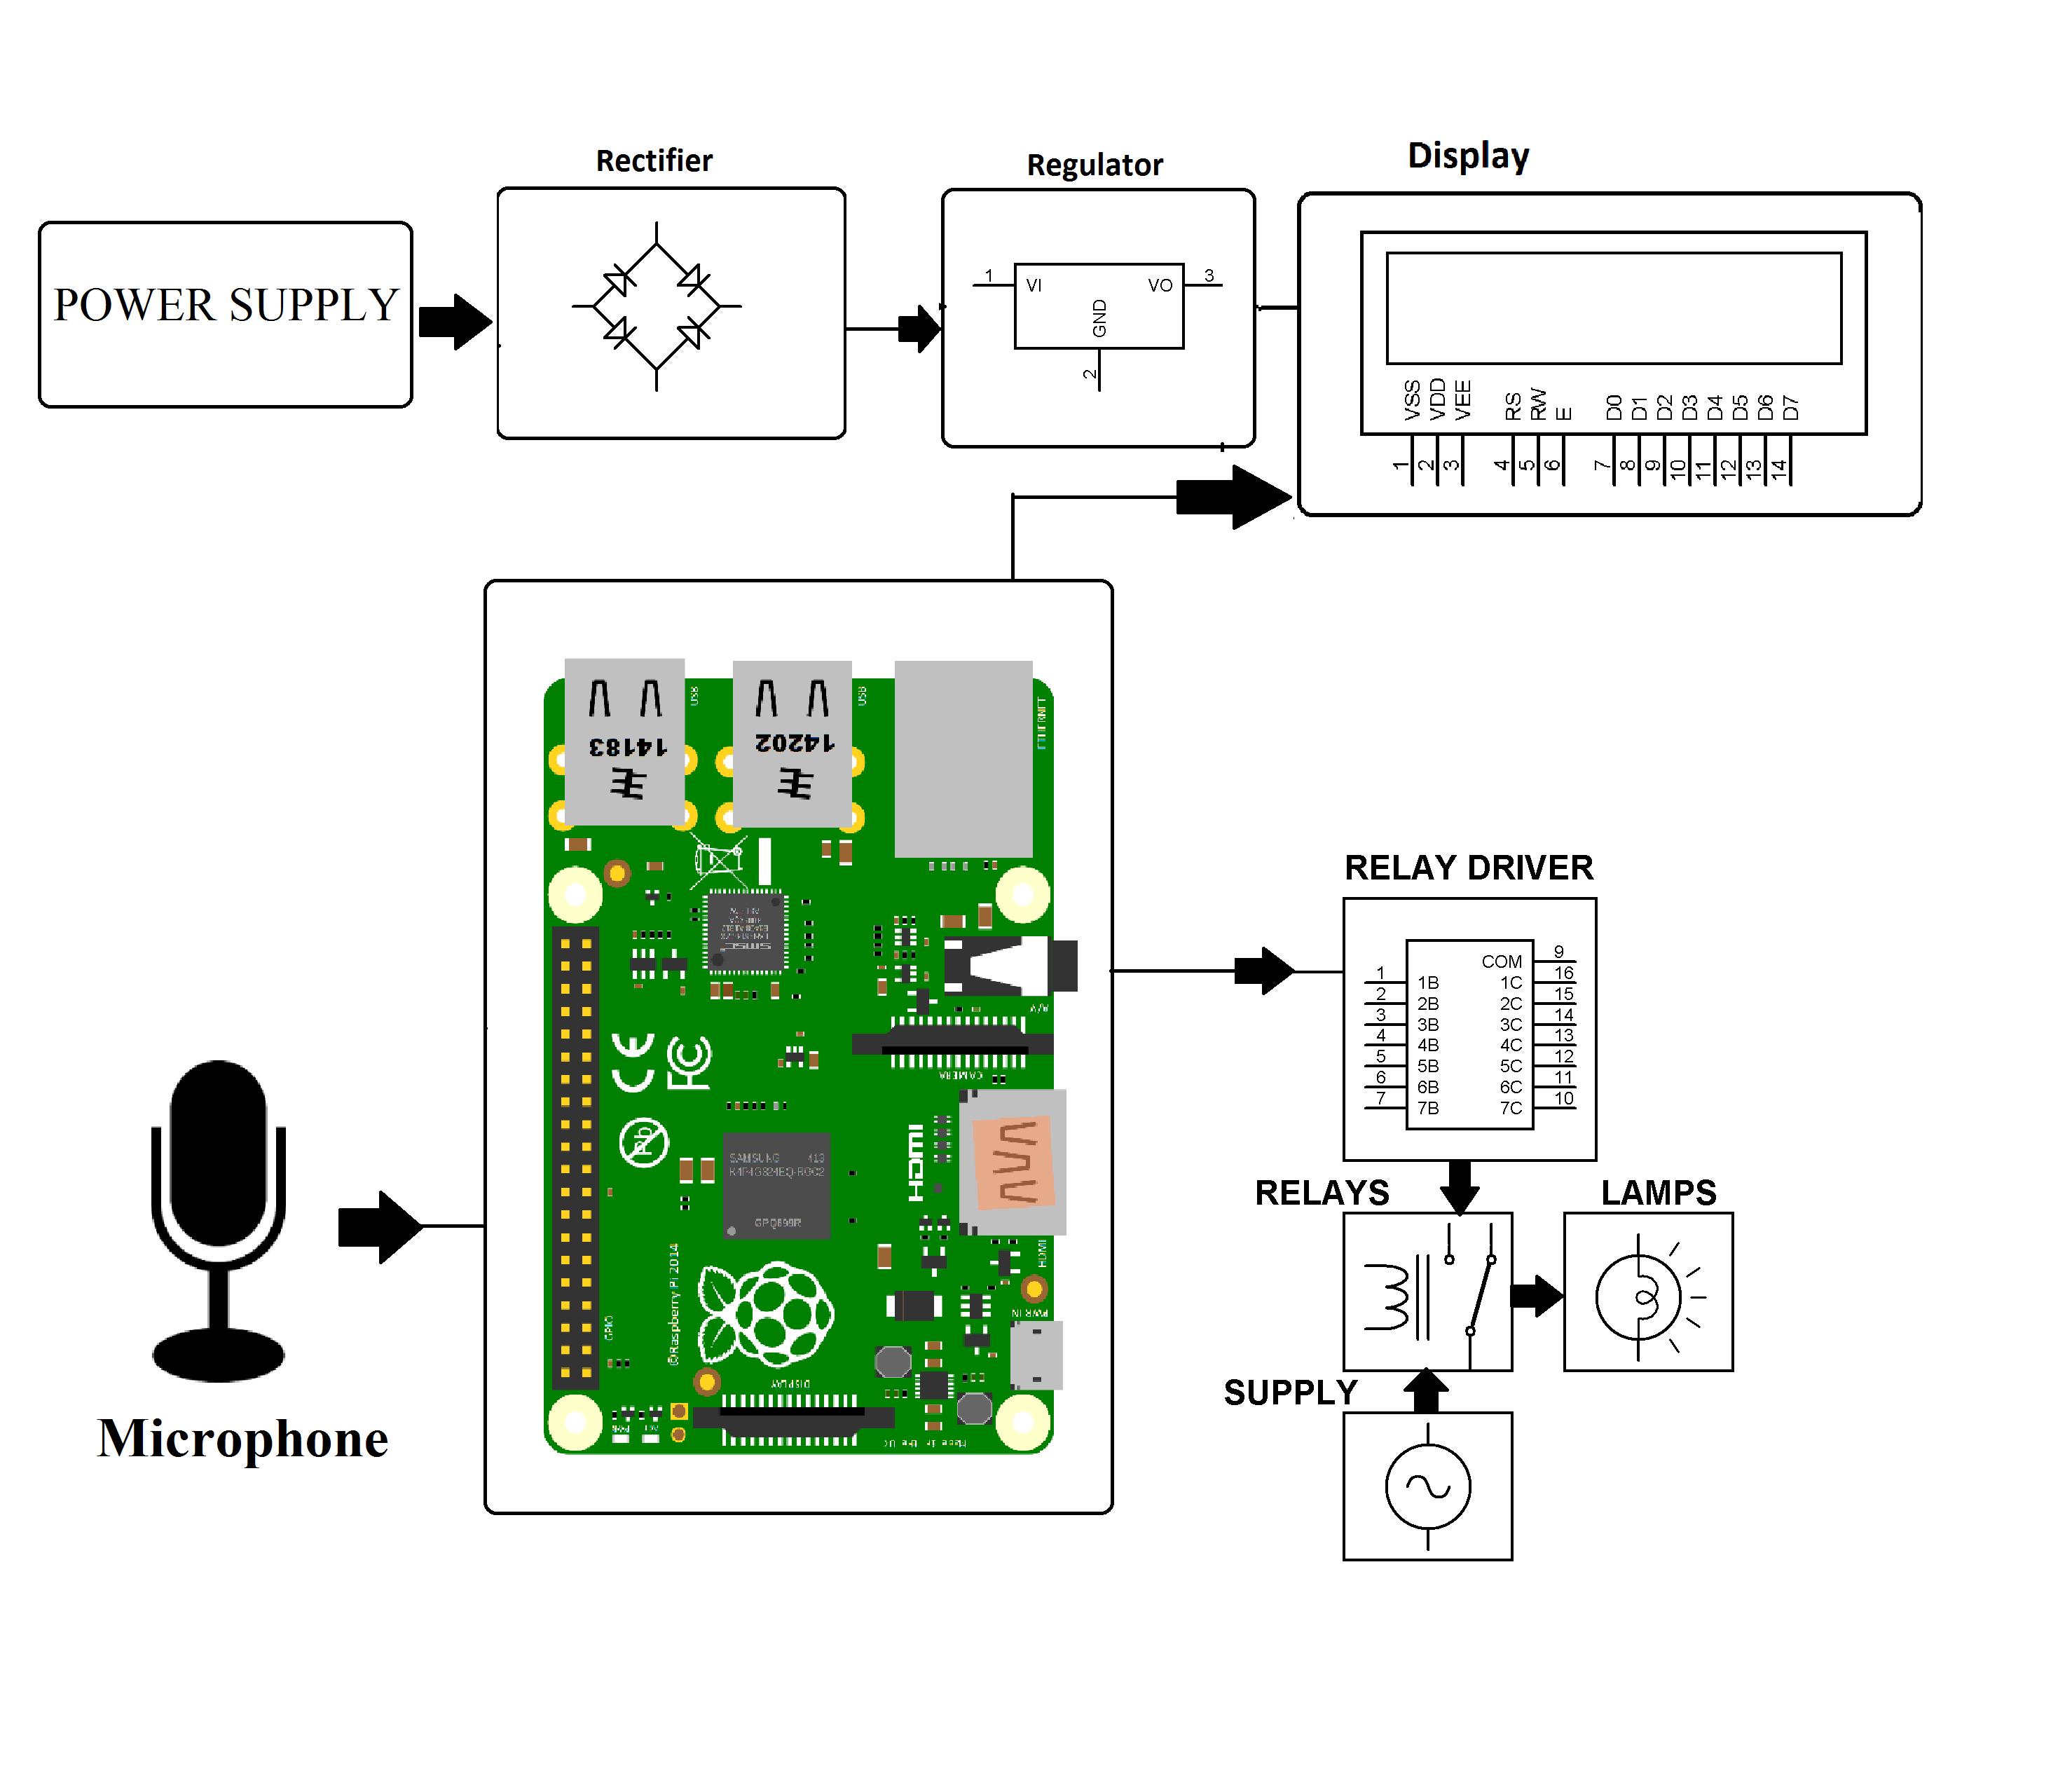 Speech Controlled Home Automation Using Raspberry Pi